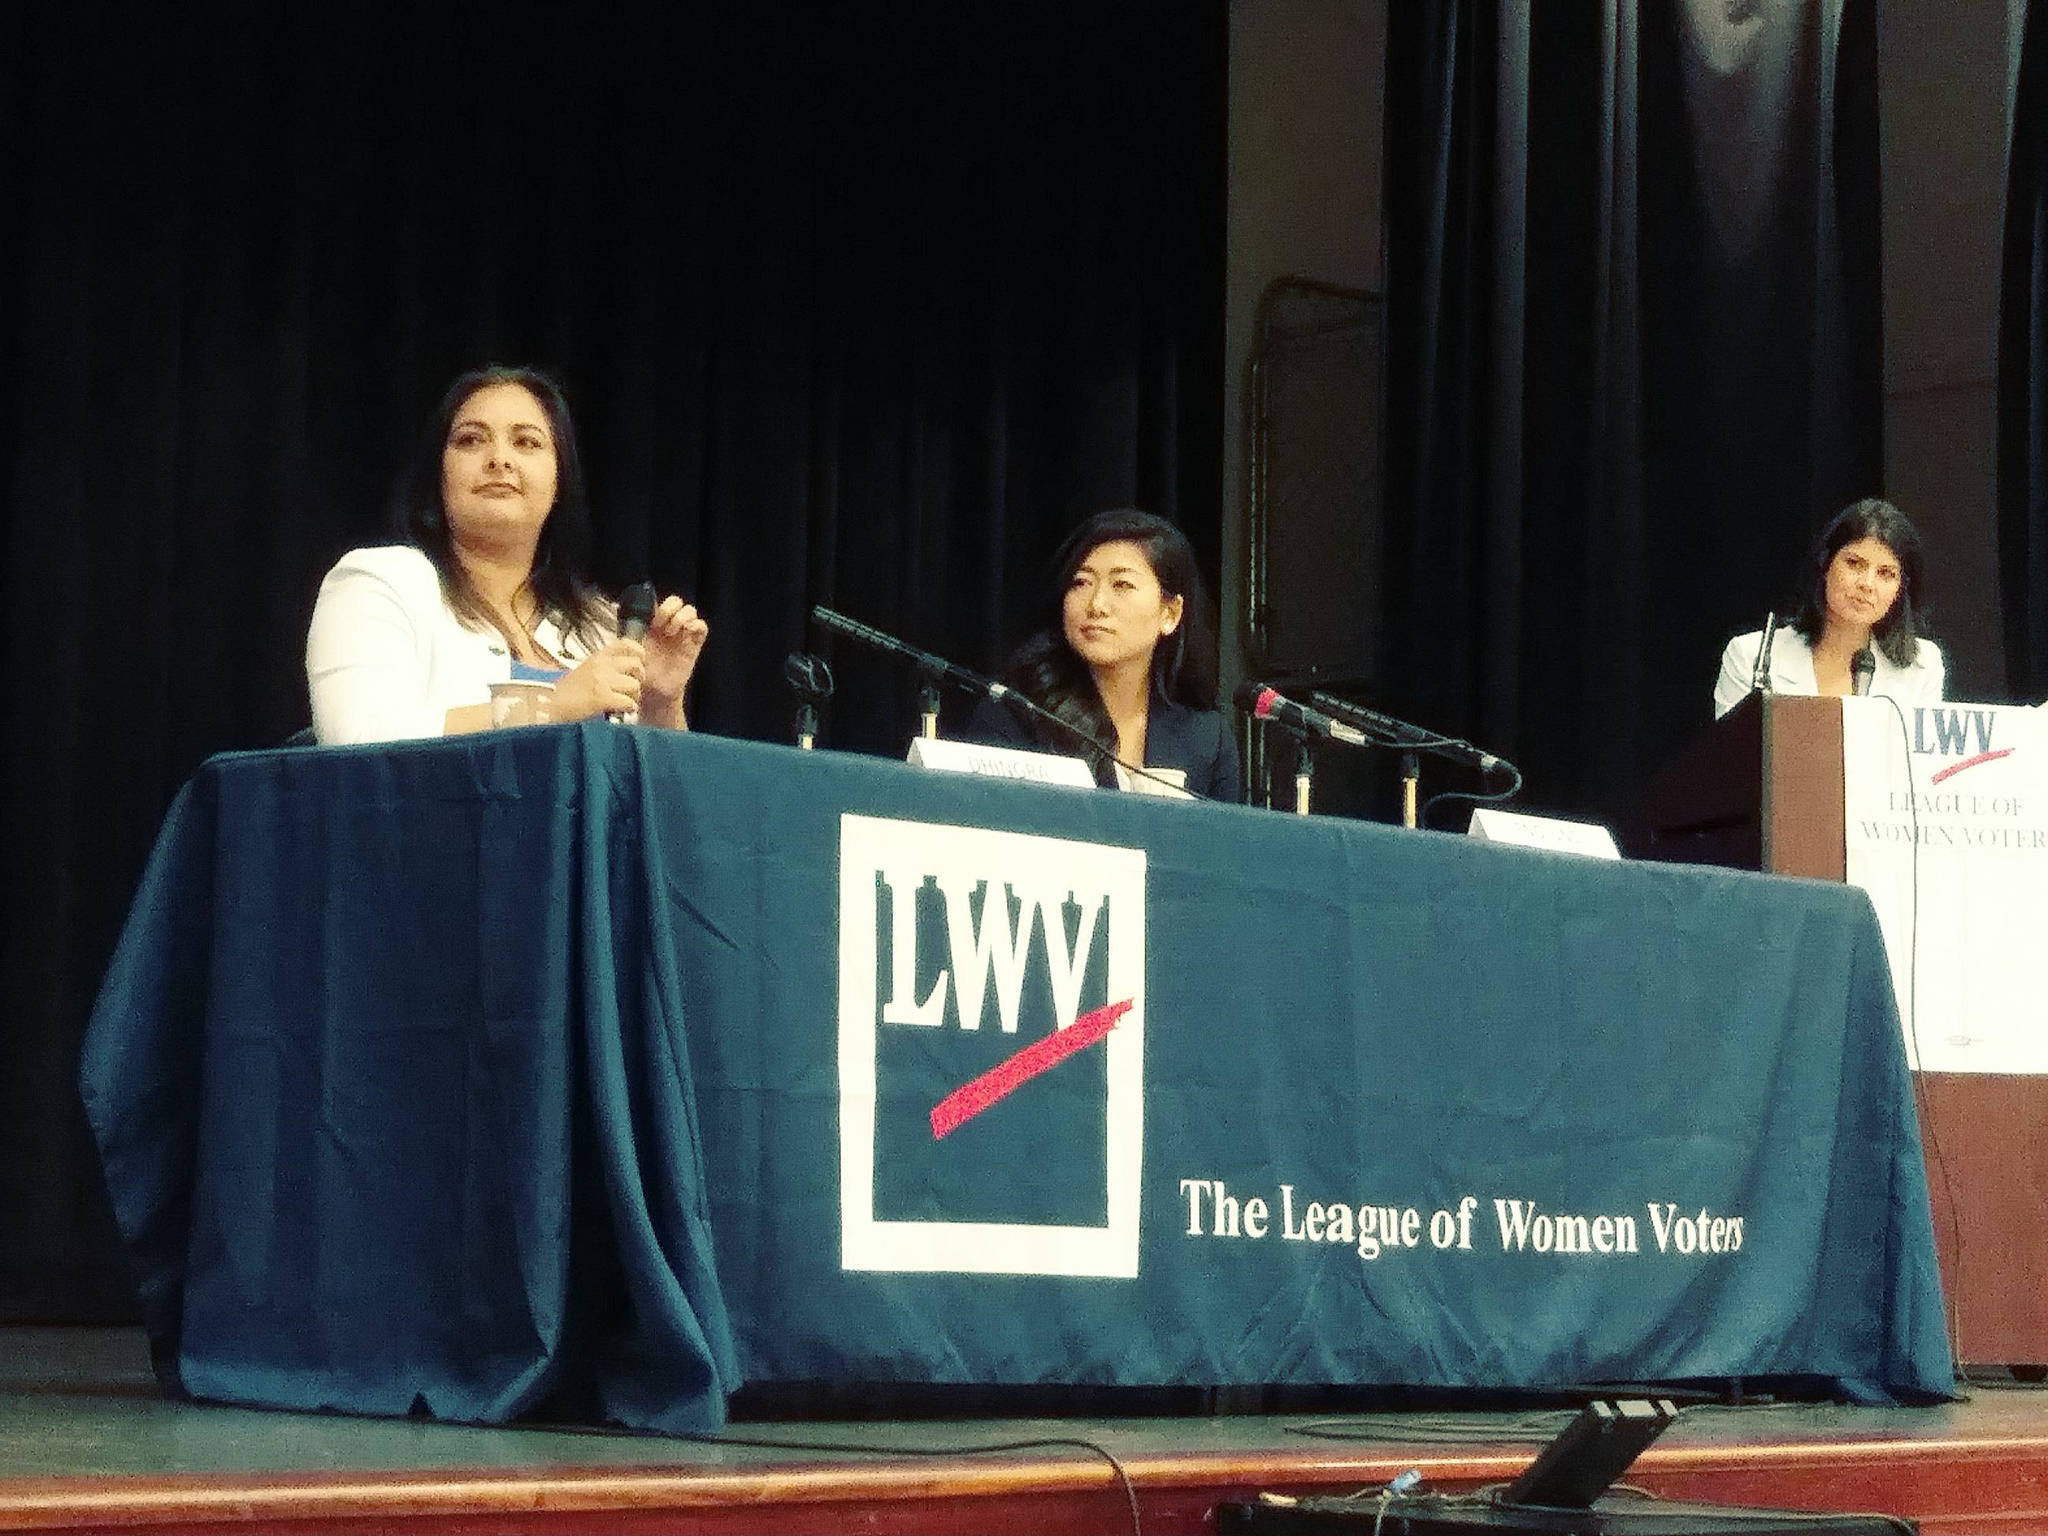 State Senate candidates Manka Dhingra, left, and Jinyoung Lee Englund, center, at Monday’s League of Women Voters debate in Redmond. Moderator Natalie Brand is on the right. Aaron Kunkler/Redmond Reporter